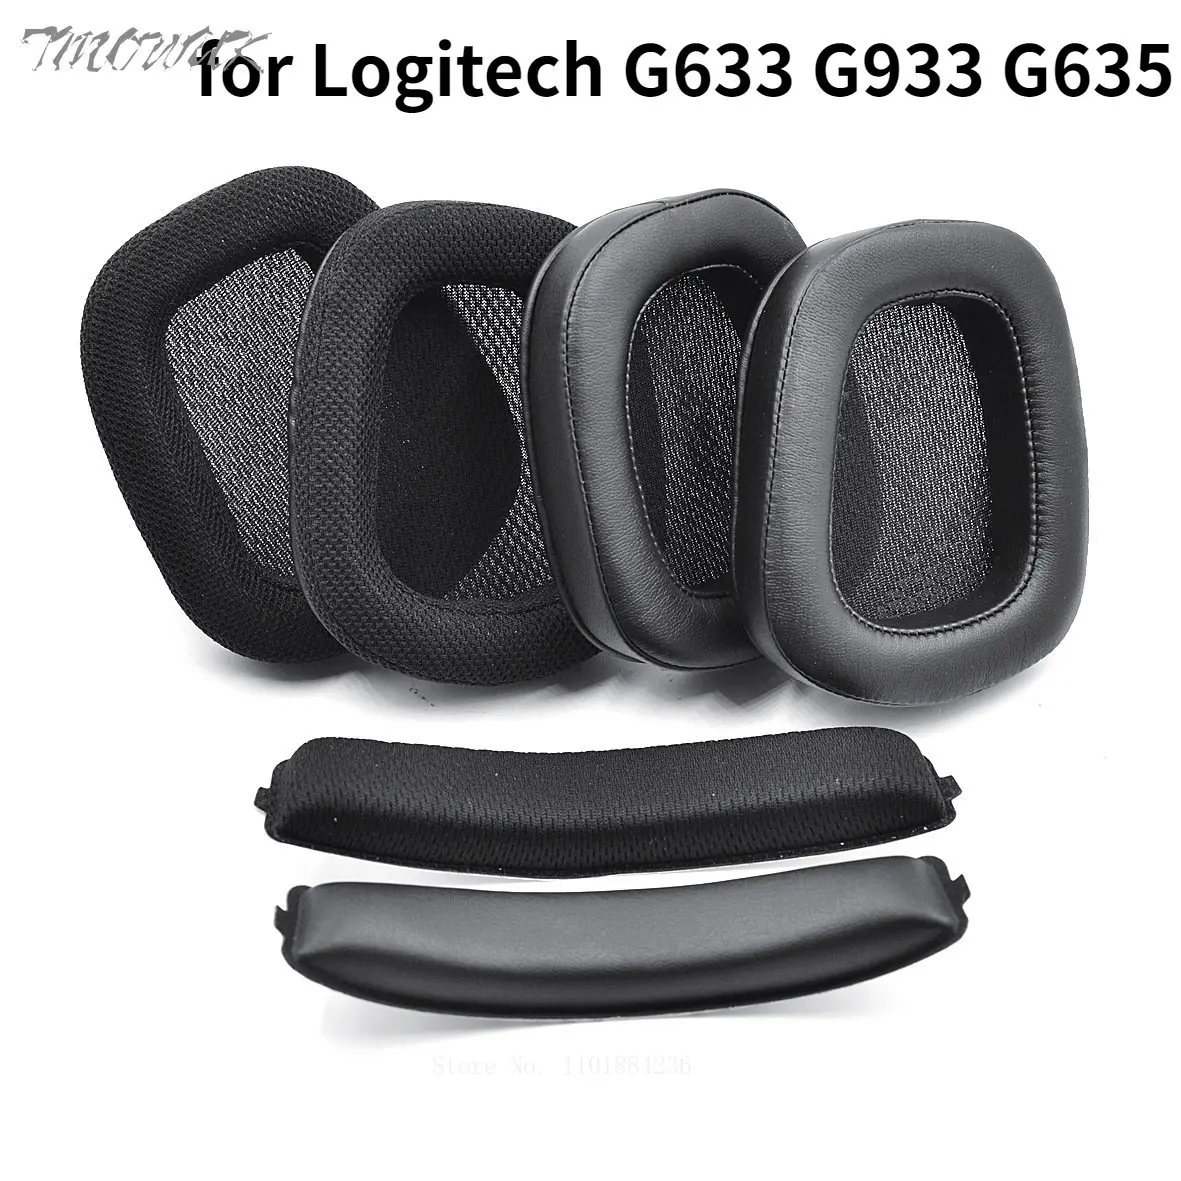 

Replacement Ear Pads Headband Kit for Logitech G633 G933 G635 G633S G933S Gaming Ear Pads Headphone Earpads Cushion Cover